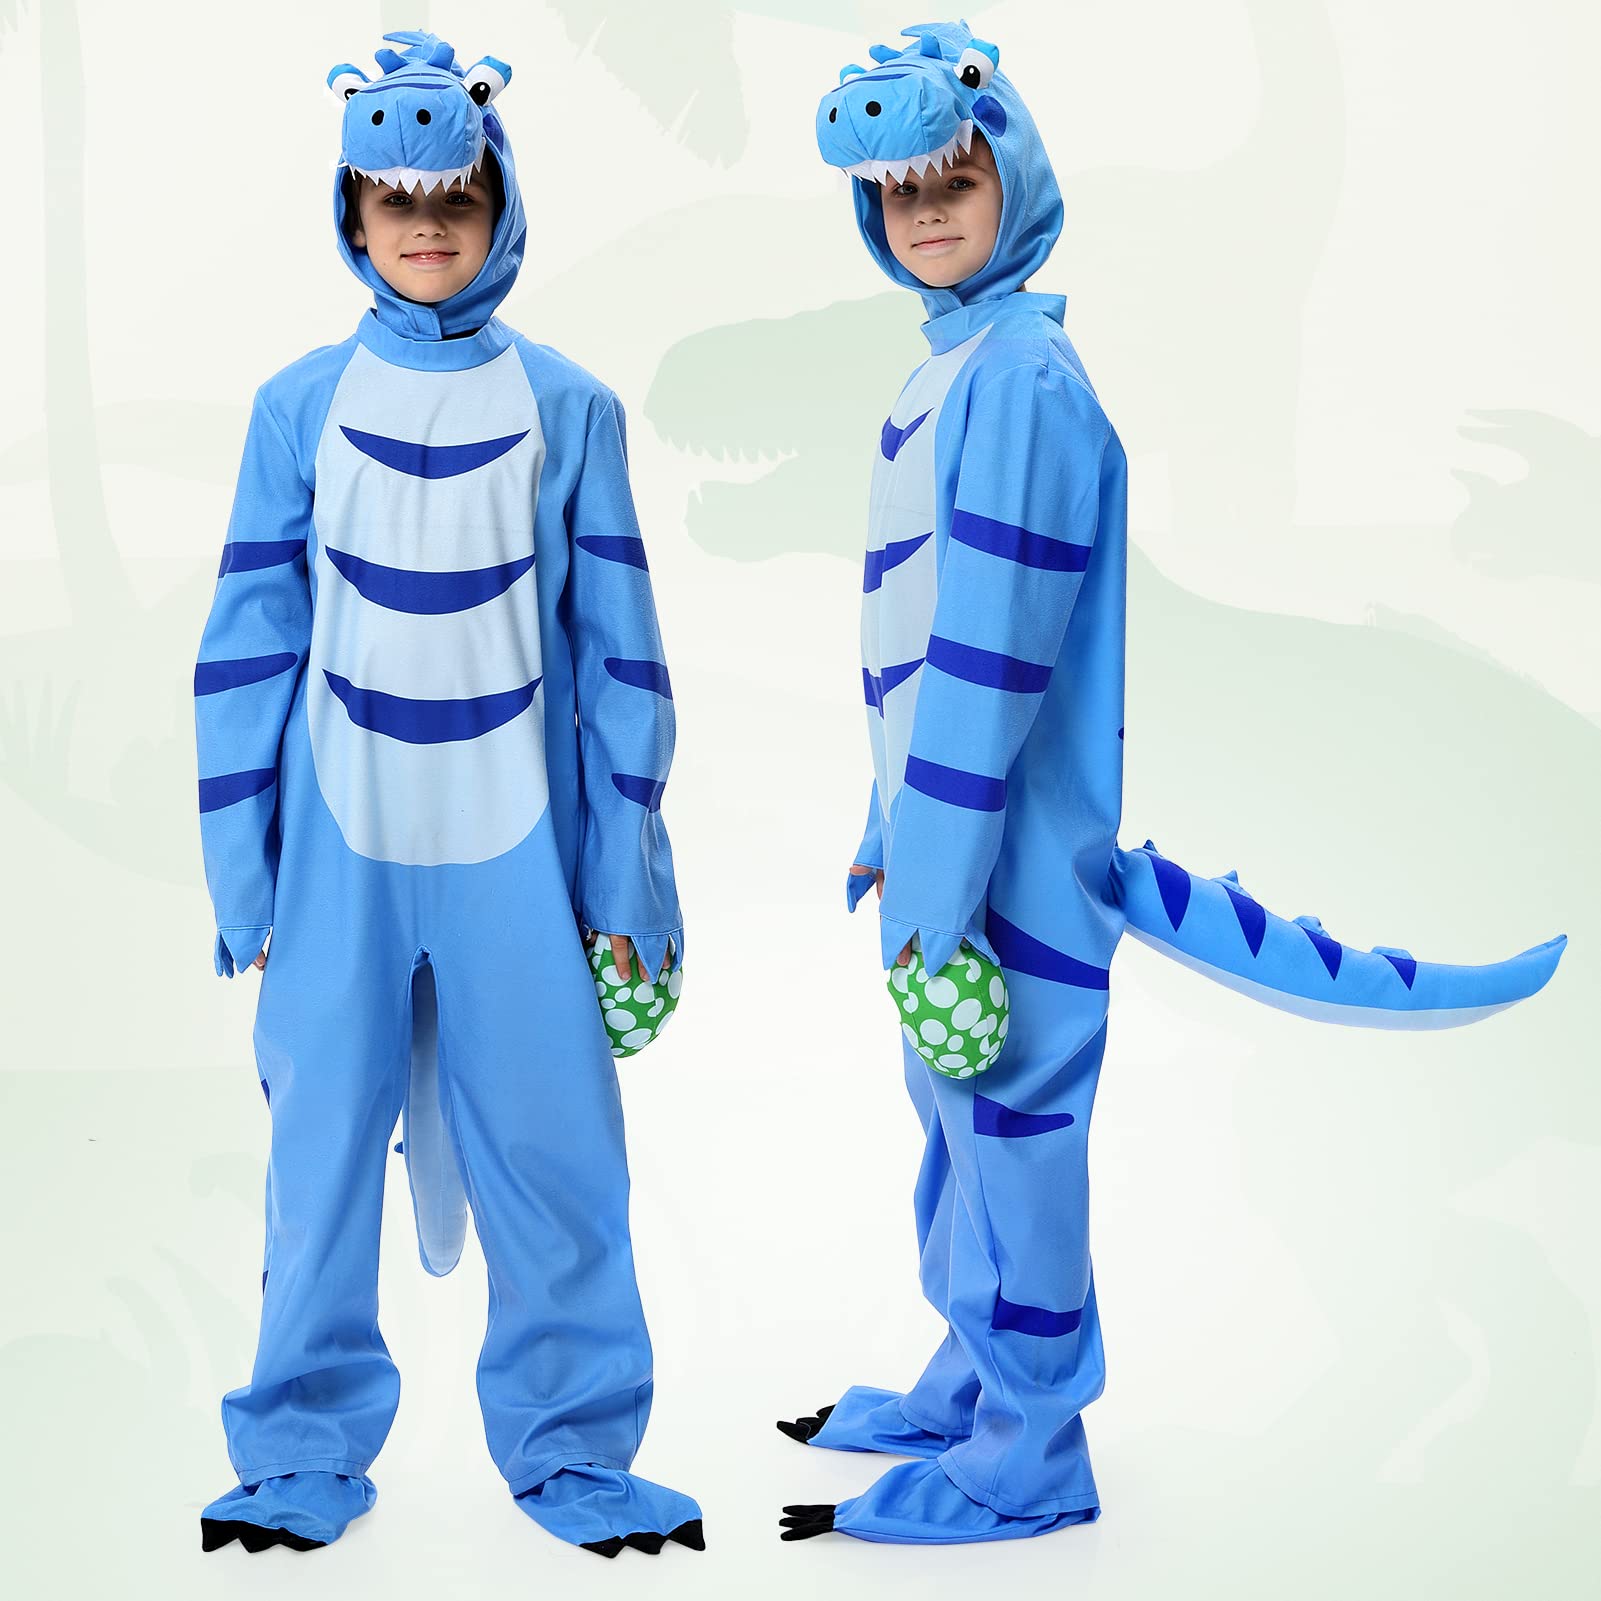 Twister.CK Kids Dinosaur Costume for Halloween Child Dinosaur Dress Up Party, Role Play and Cosplay